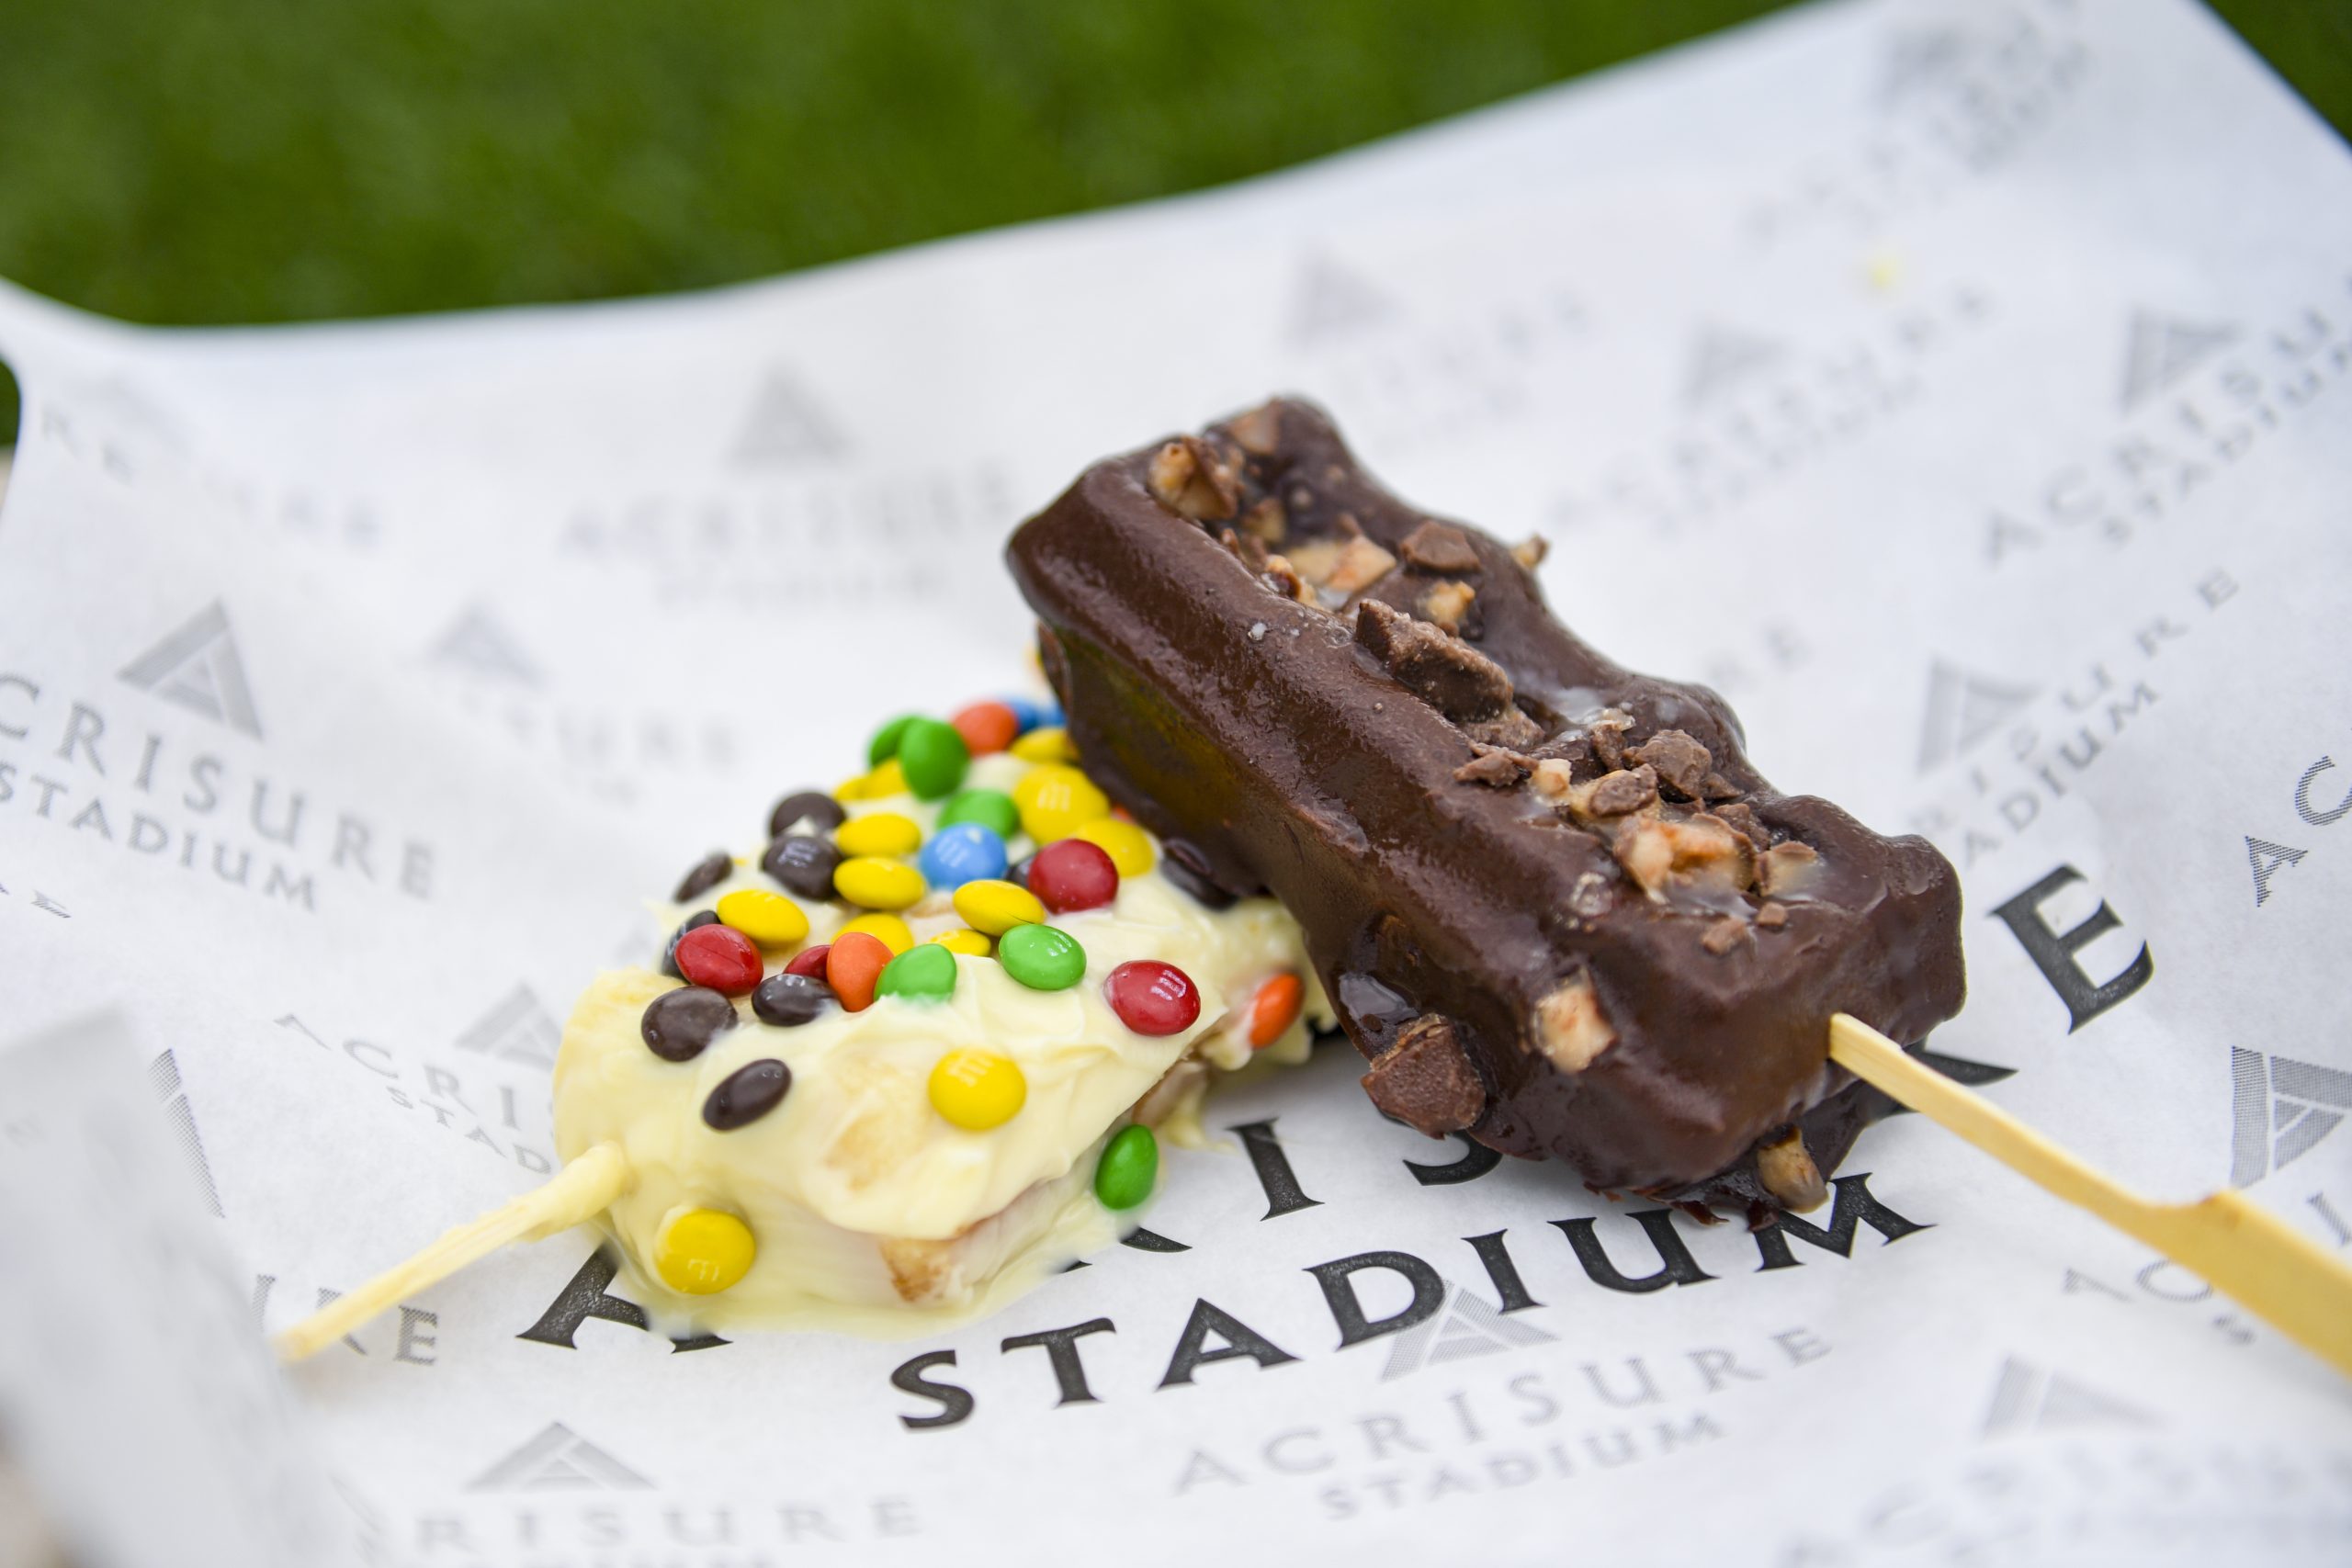 Food and drinks available for sale at Acrisure Stadium during the 2023 season, Monday, Aug. 28, 2023 in Atlanta, GA. (Abigail Dean / Pittsburgh Steelers)